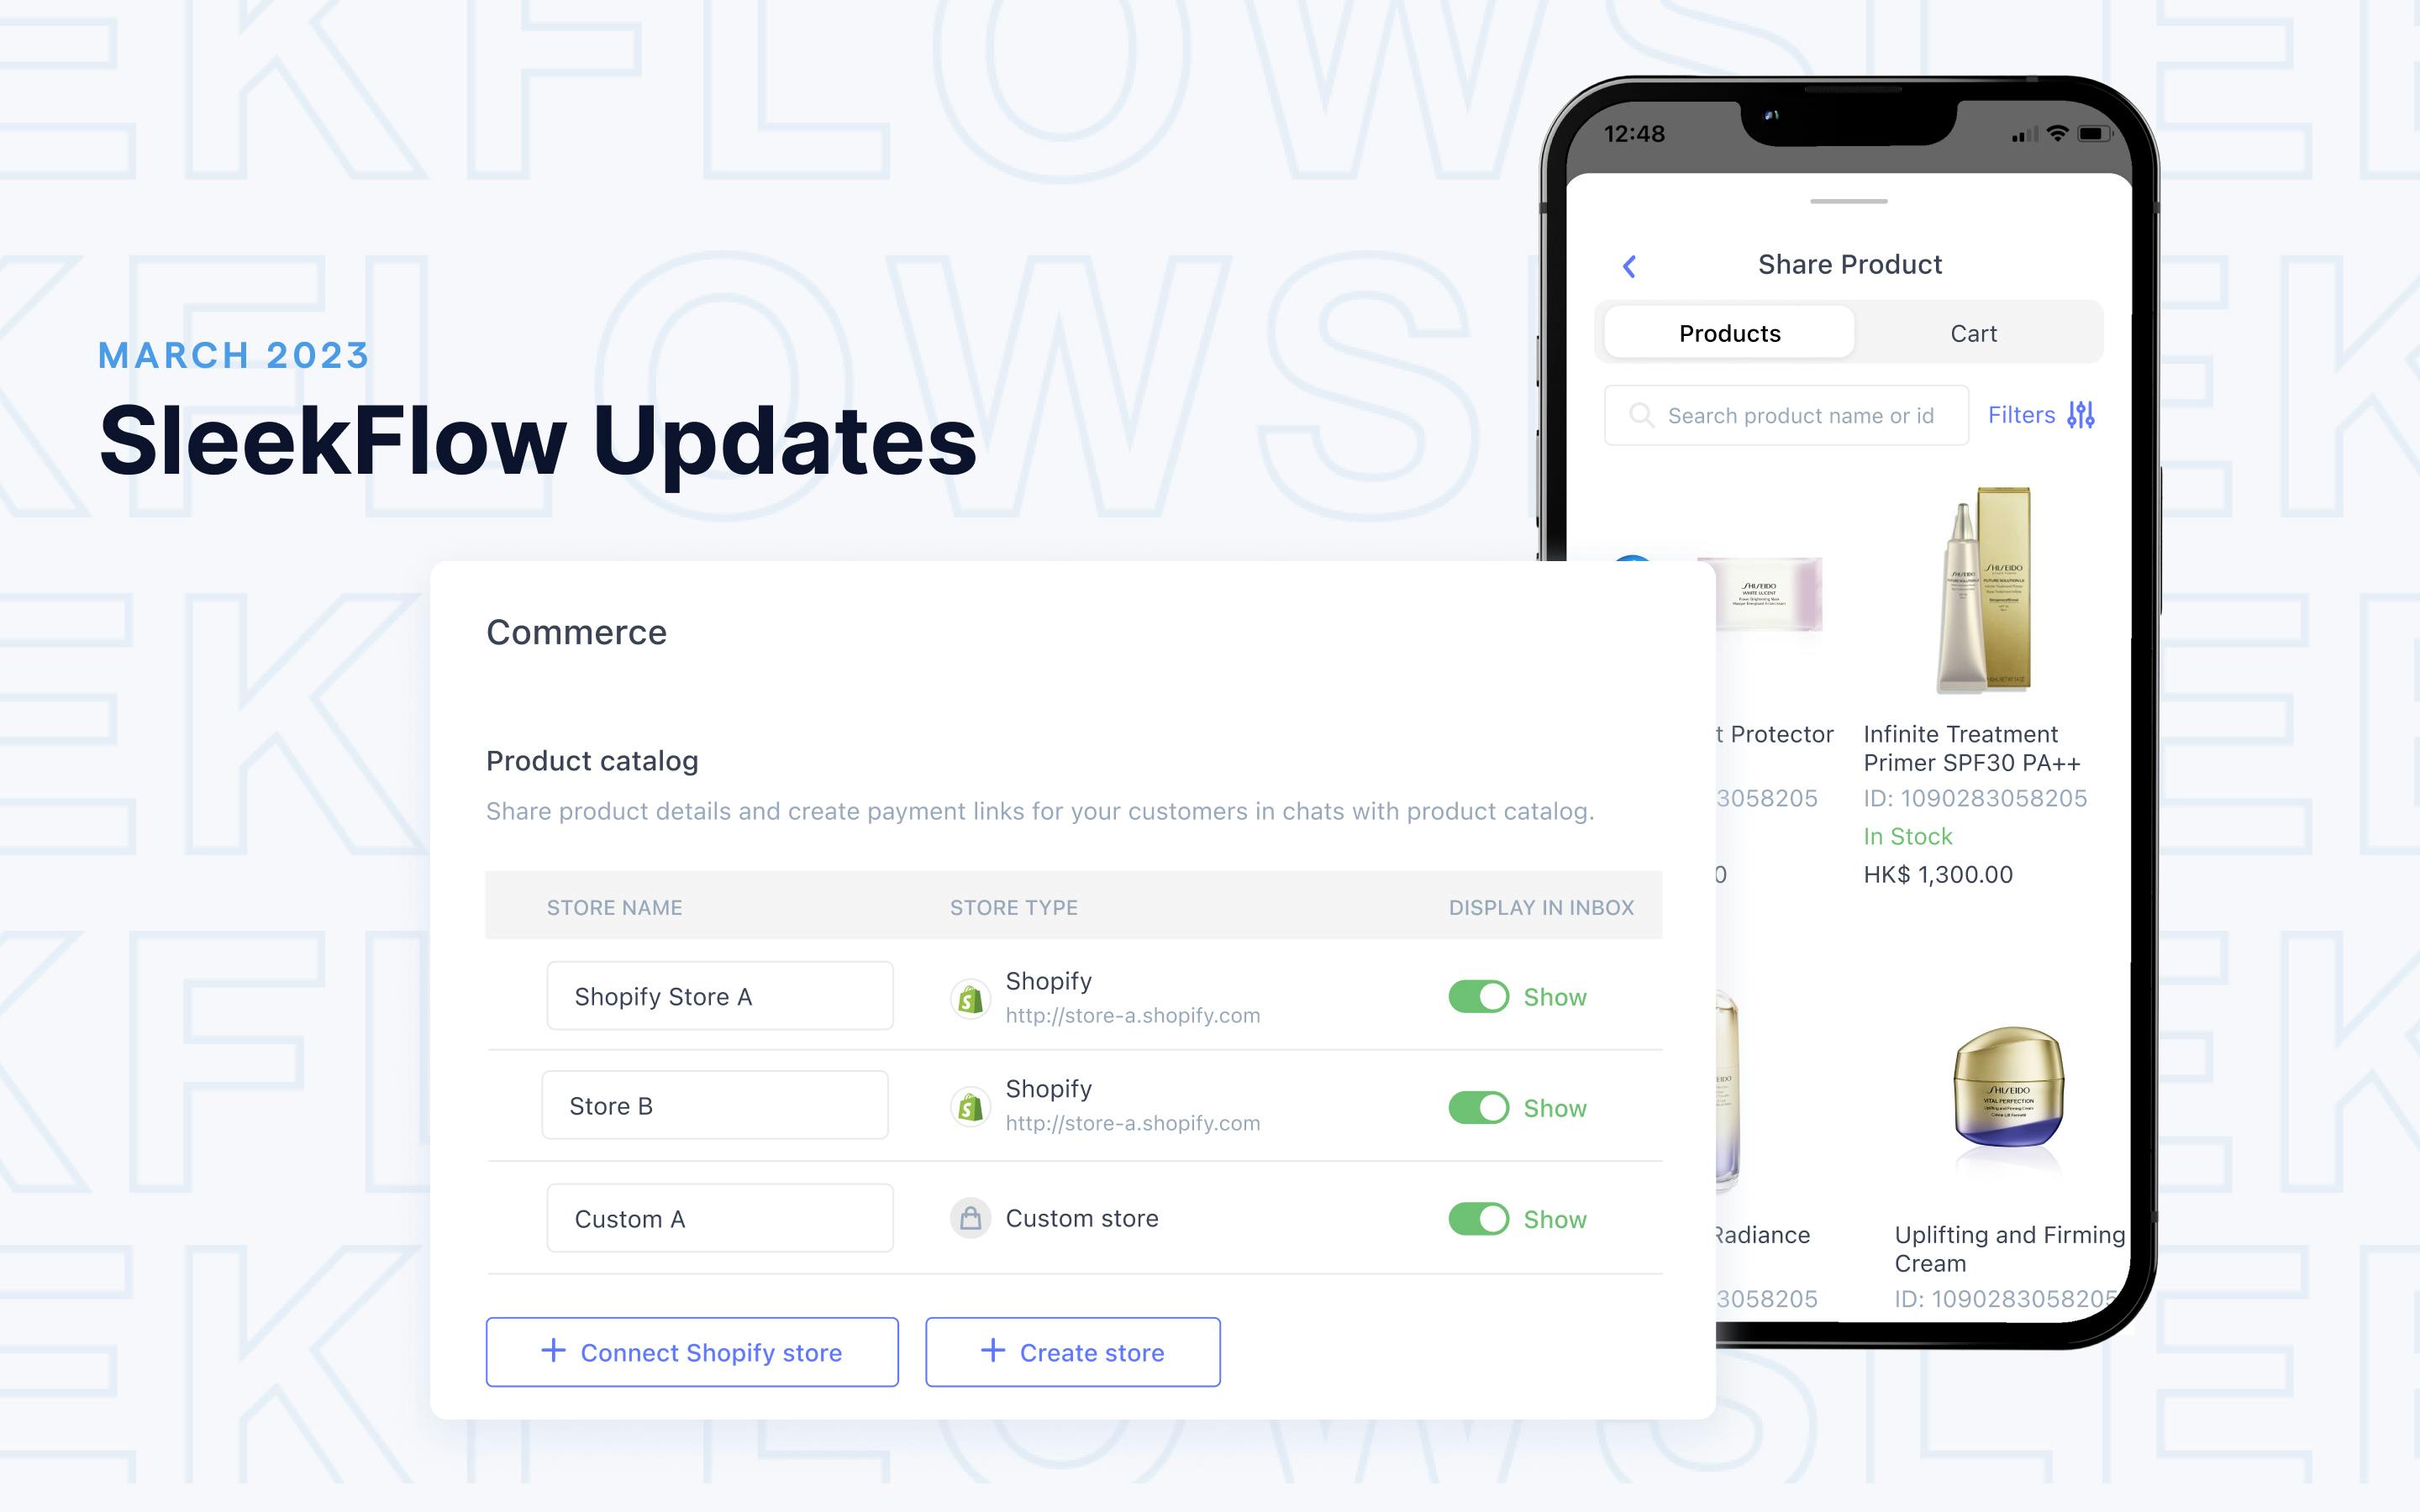 What’s new in SleekFlow: Create a store in messaging apps within minutes